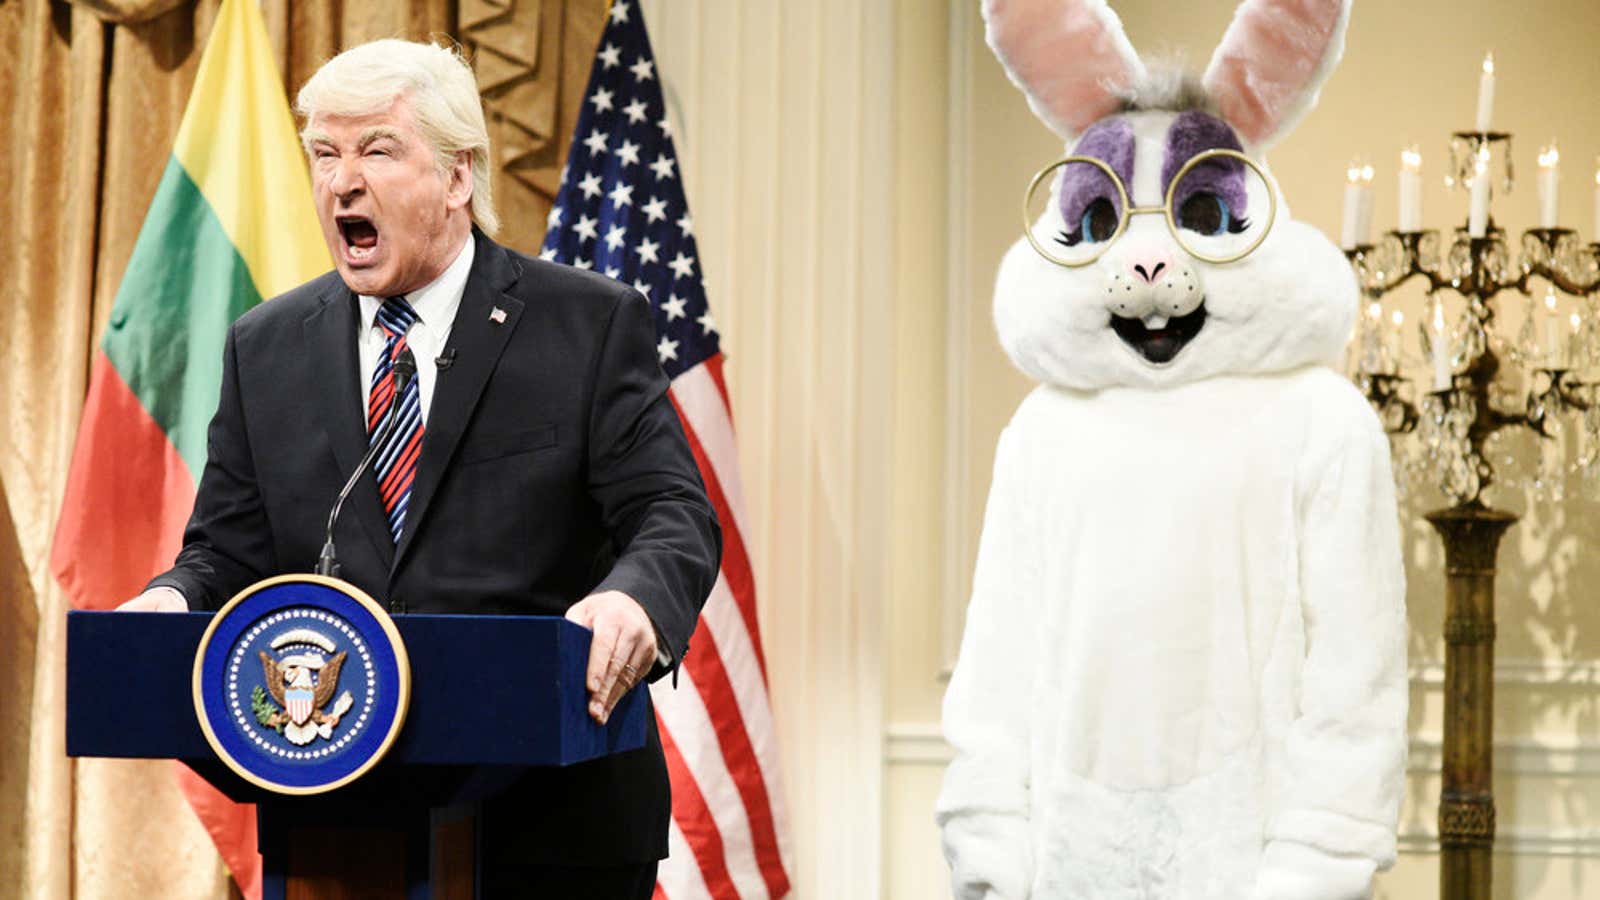 Alec Baldwin belts out his Trump impression on Saturday Night Live